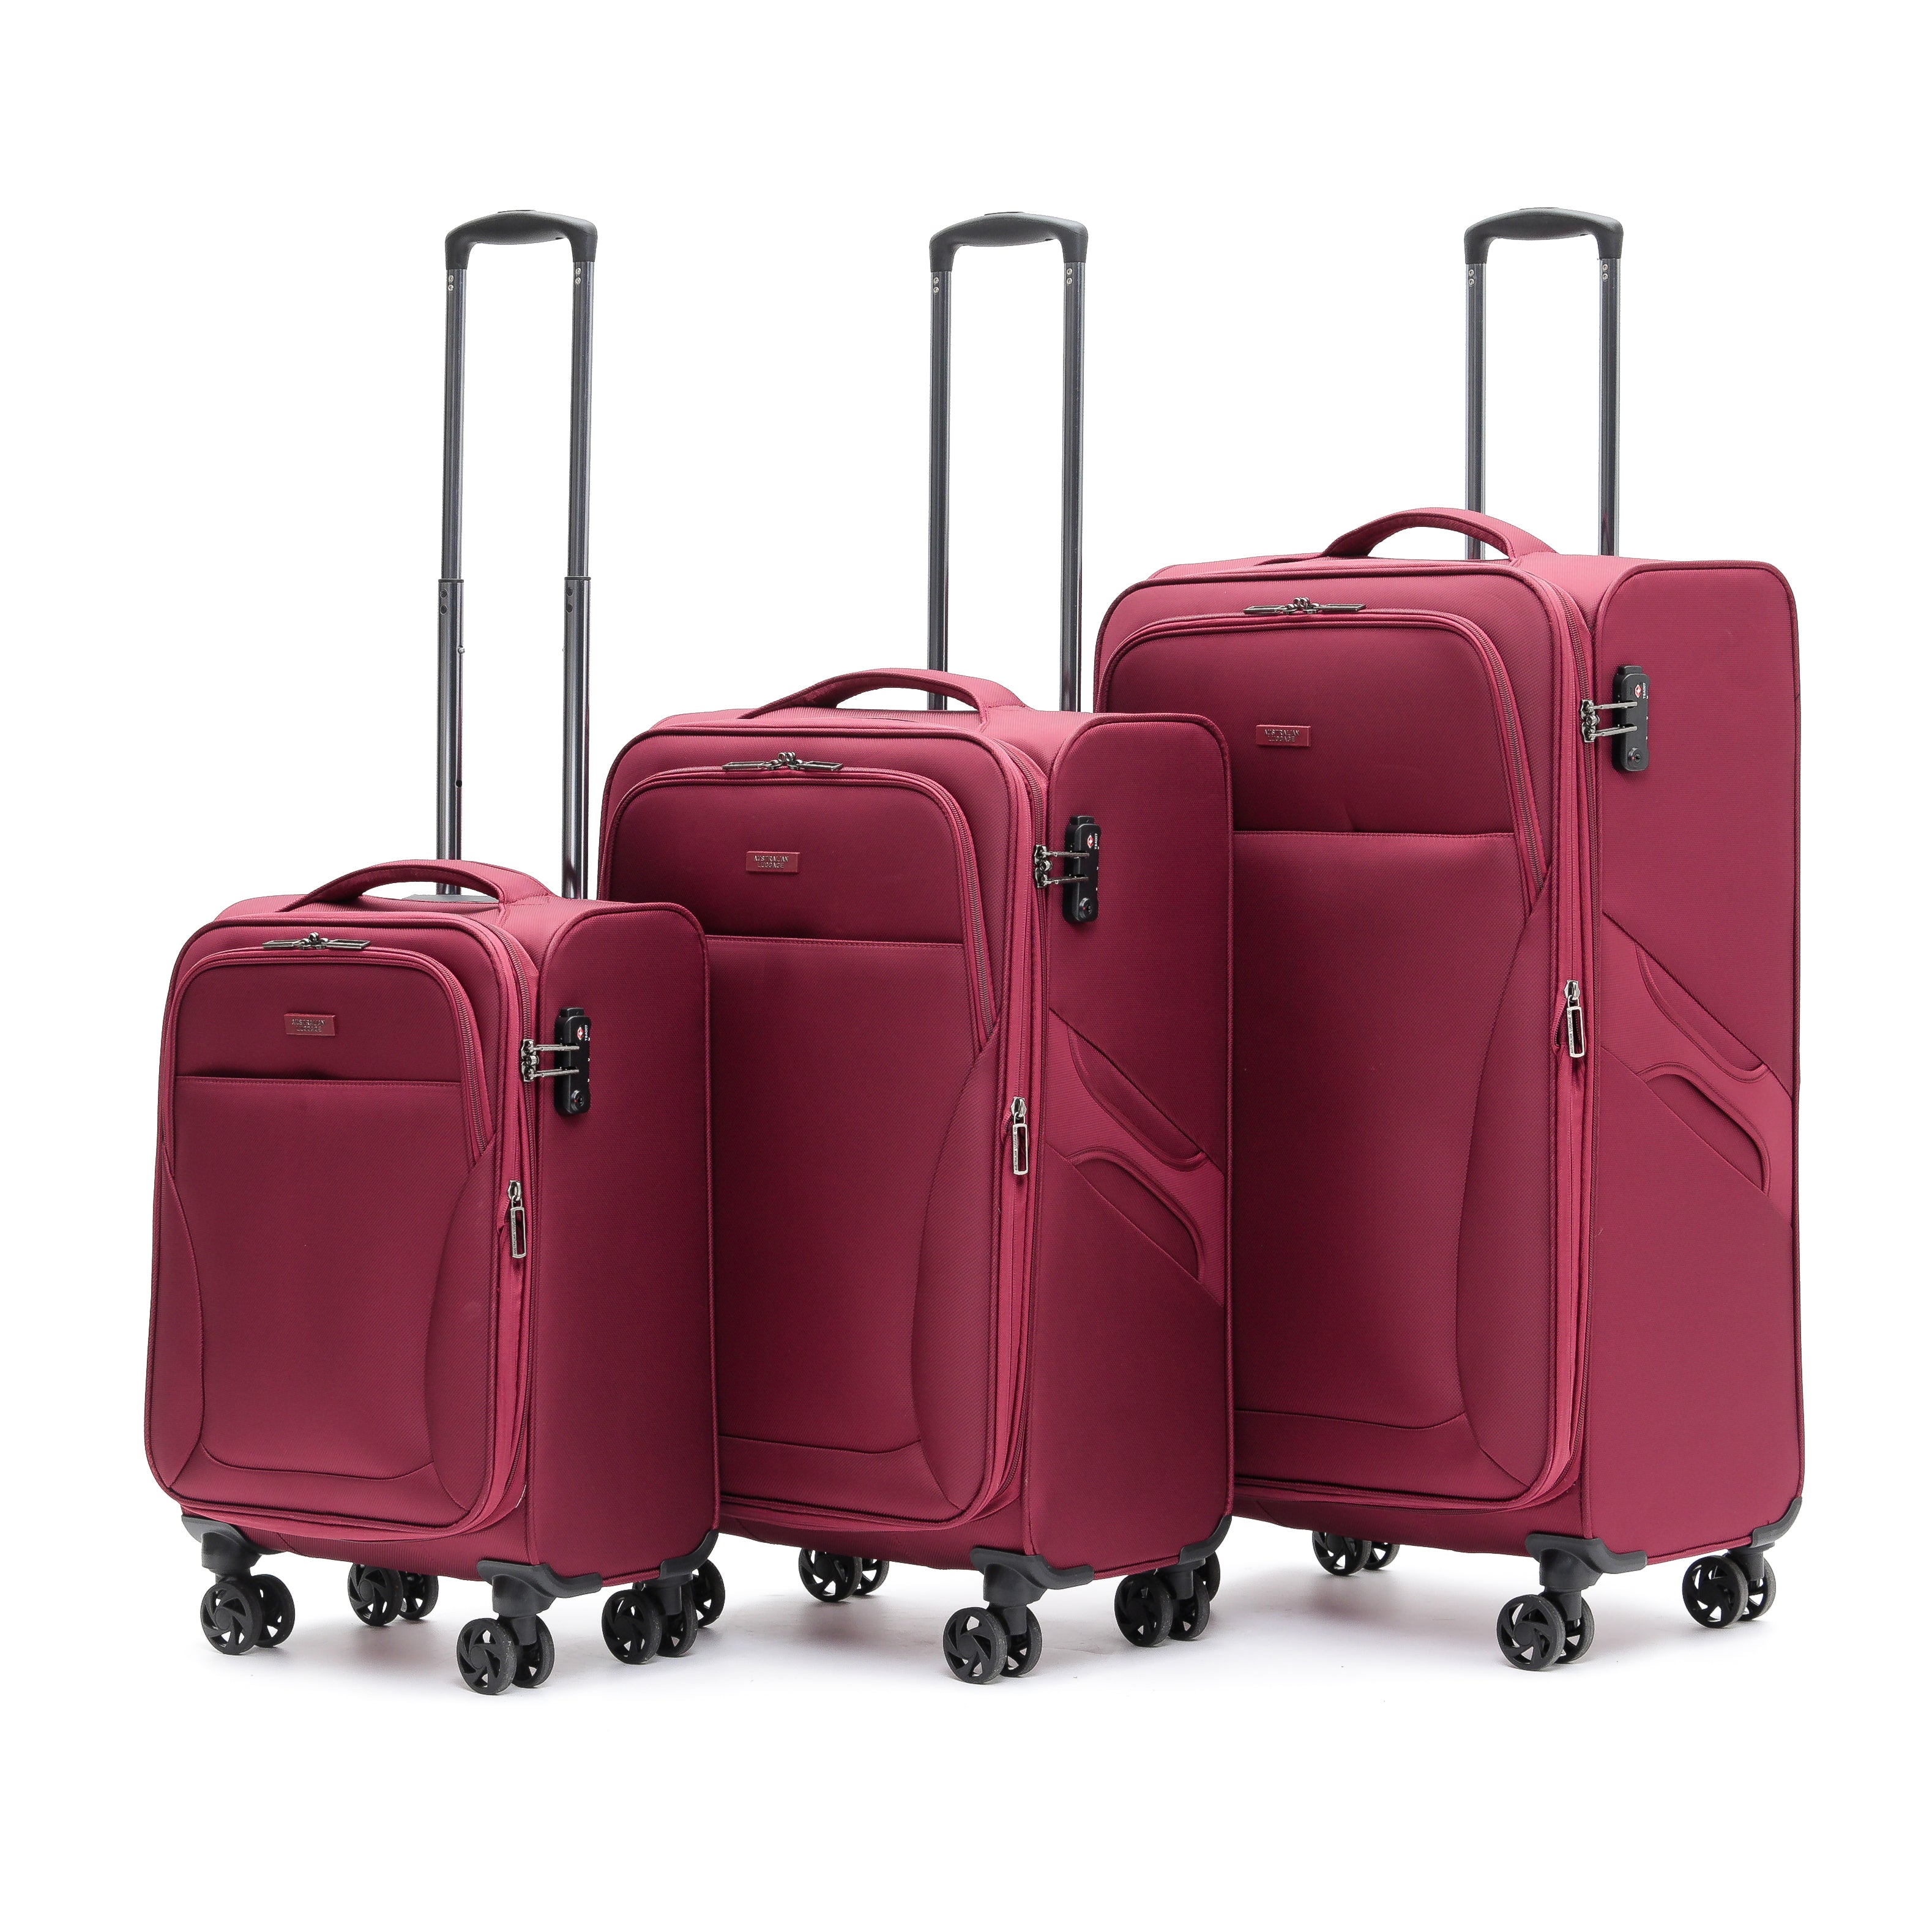 Aus Luggage - WINGS Set of 3 Suitcases - Wine-1